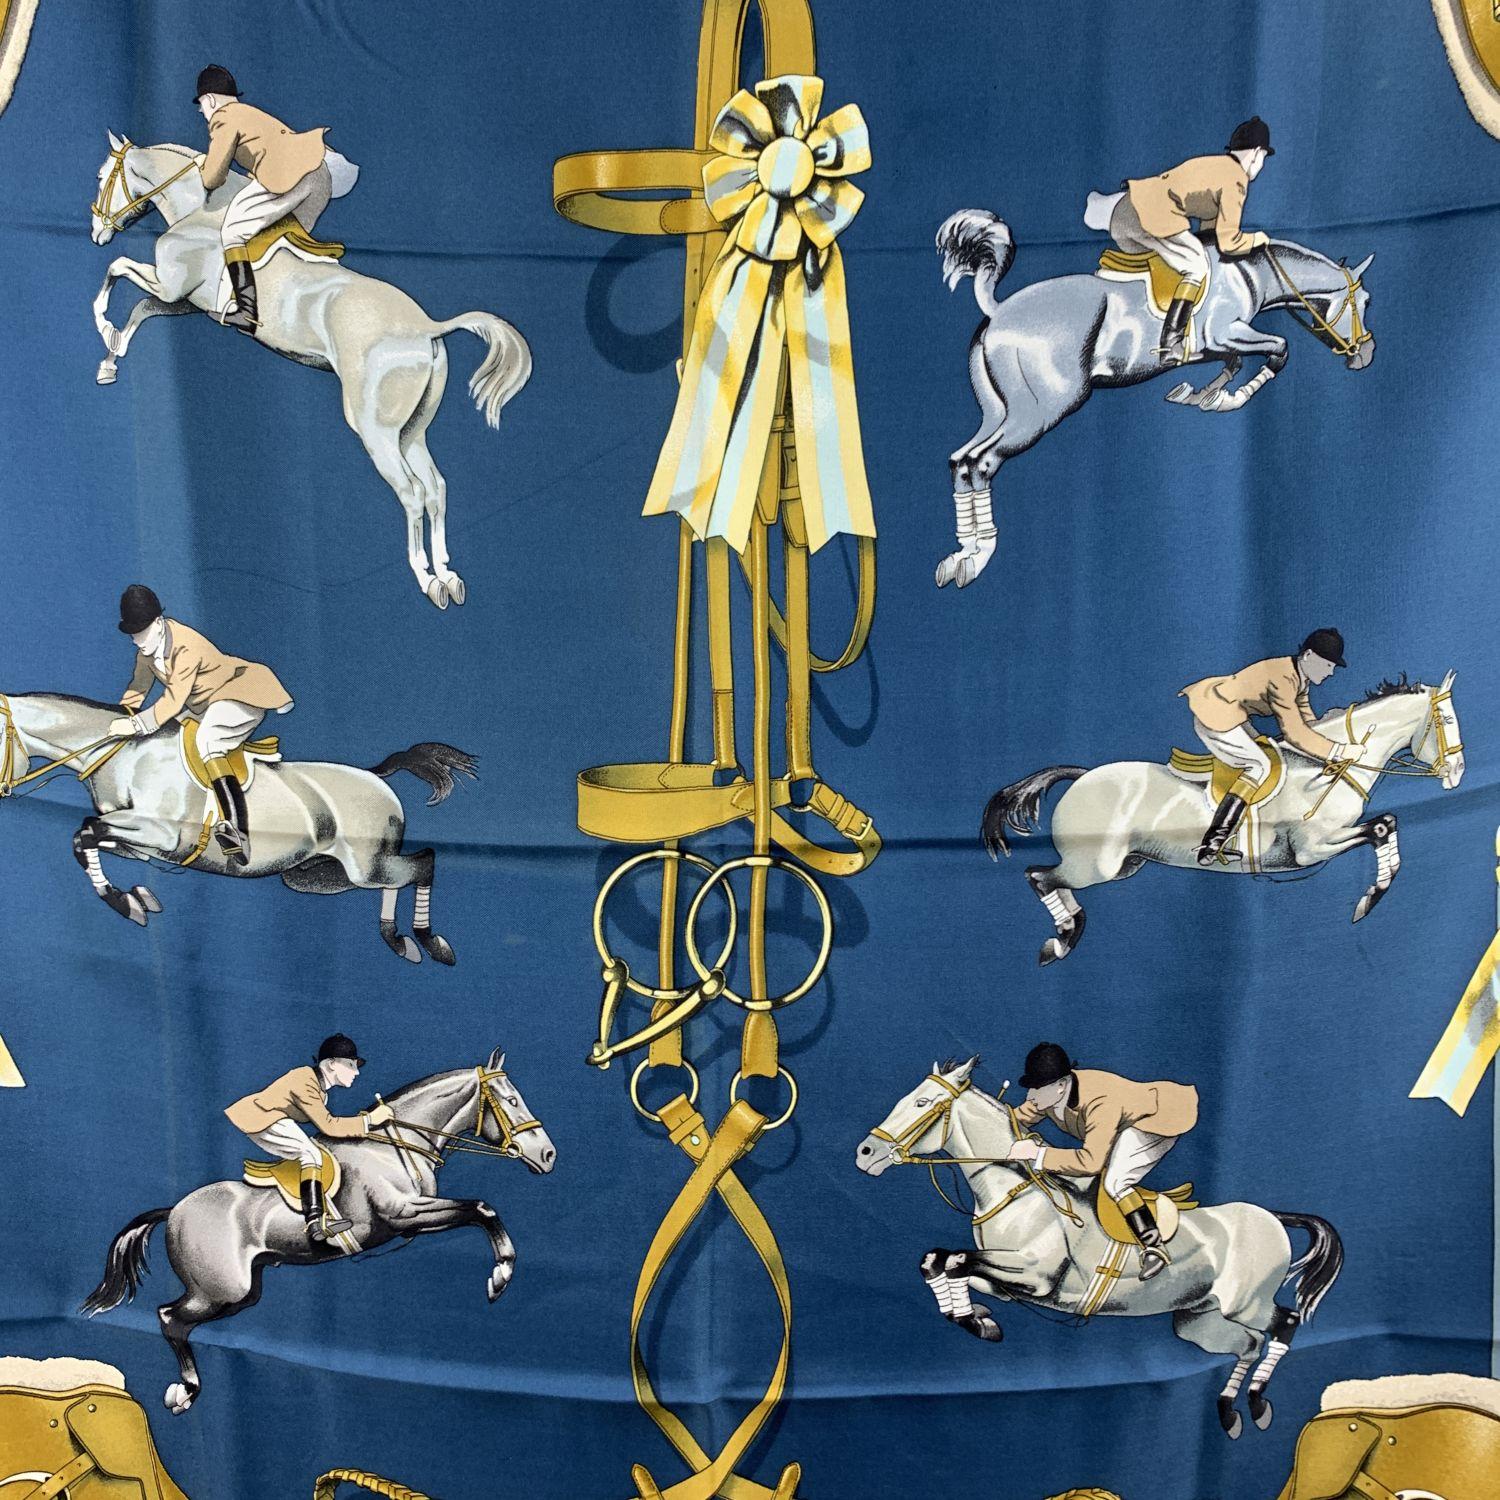 Vintage HERMES Silk scarf named 'Jumping' by Phippe Ledoux. First issued in 1971 and then 1975. Equestrian theme. The border of the scarf is in light blue color. 100% silk. 'HERMES Paris' with copyright symbol printed in the lower right corner.